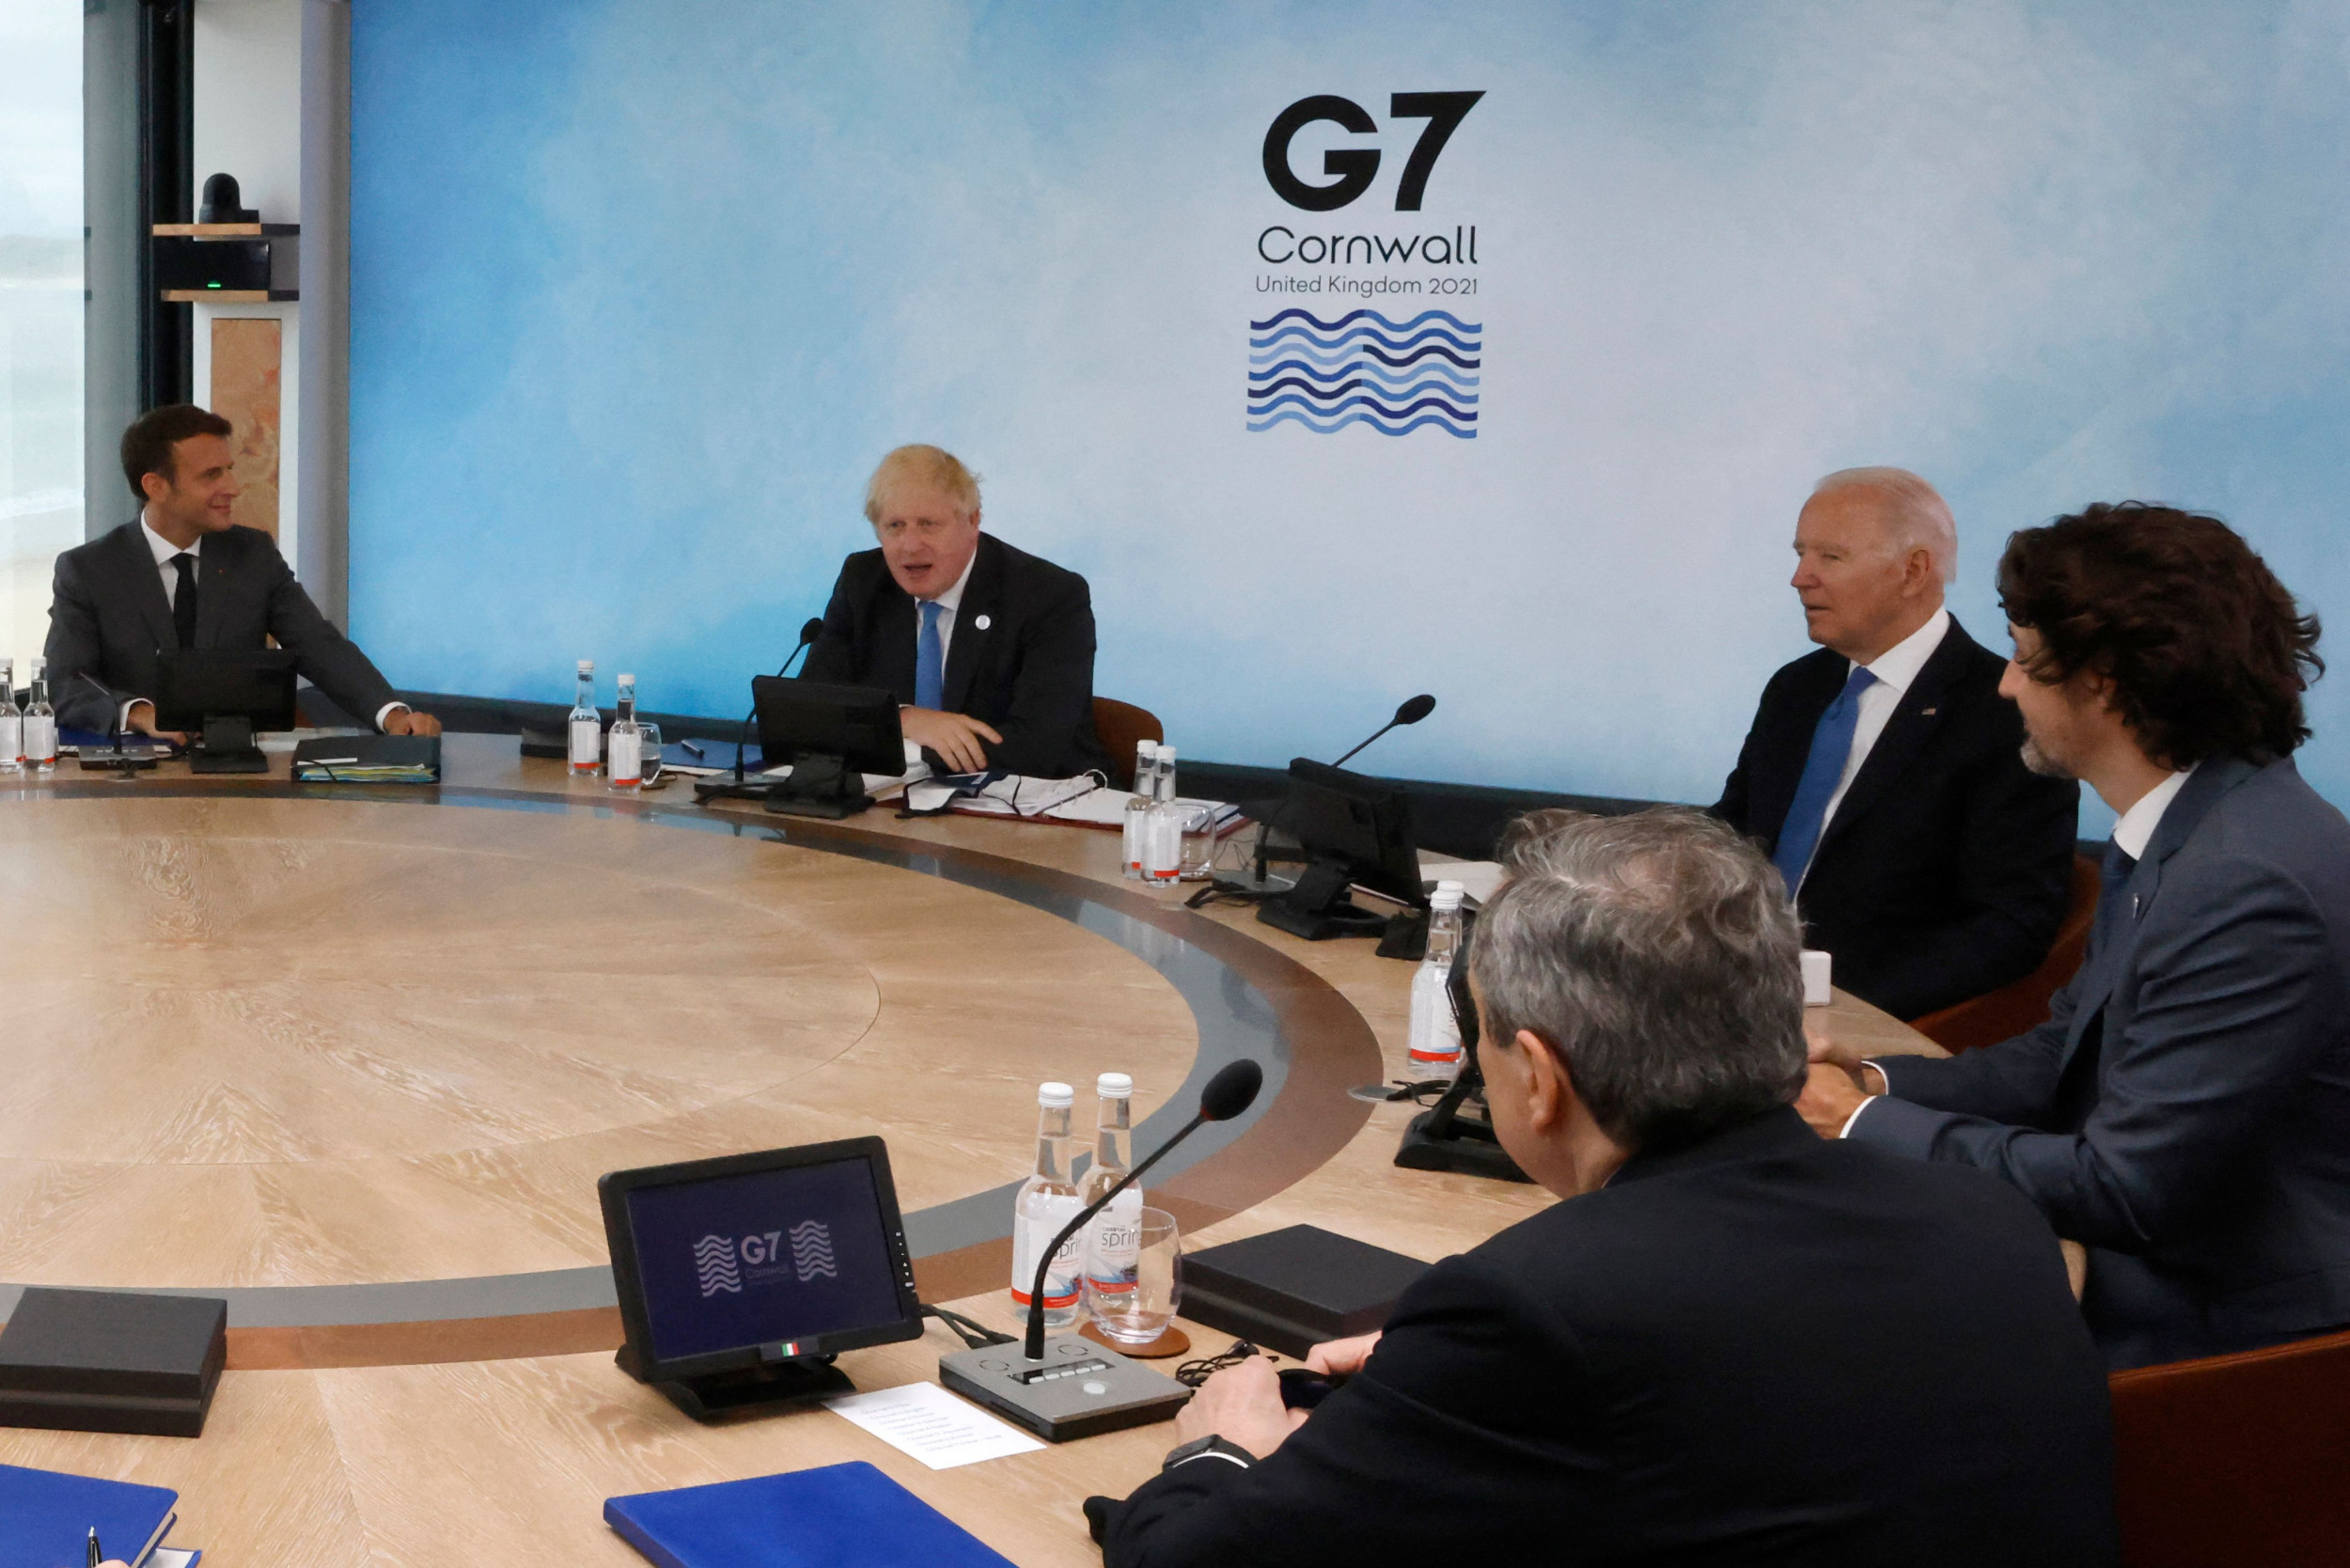 COVID Dominates G7 Meeting as World Leaders Look to End Pandemic in 2022, Prevent Next One